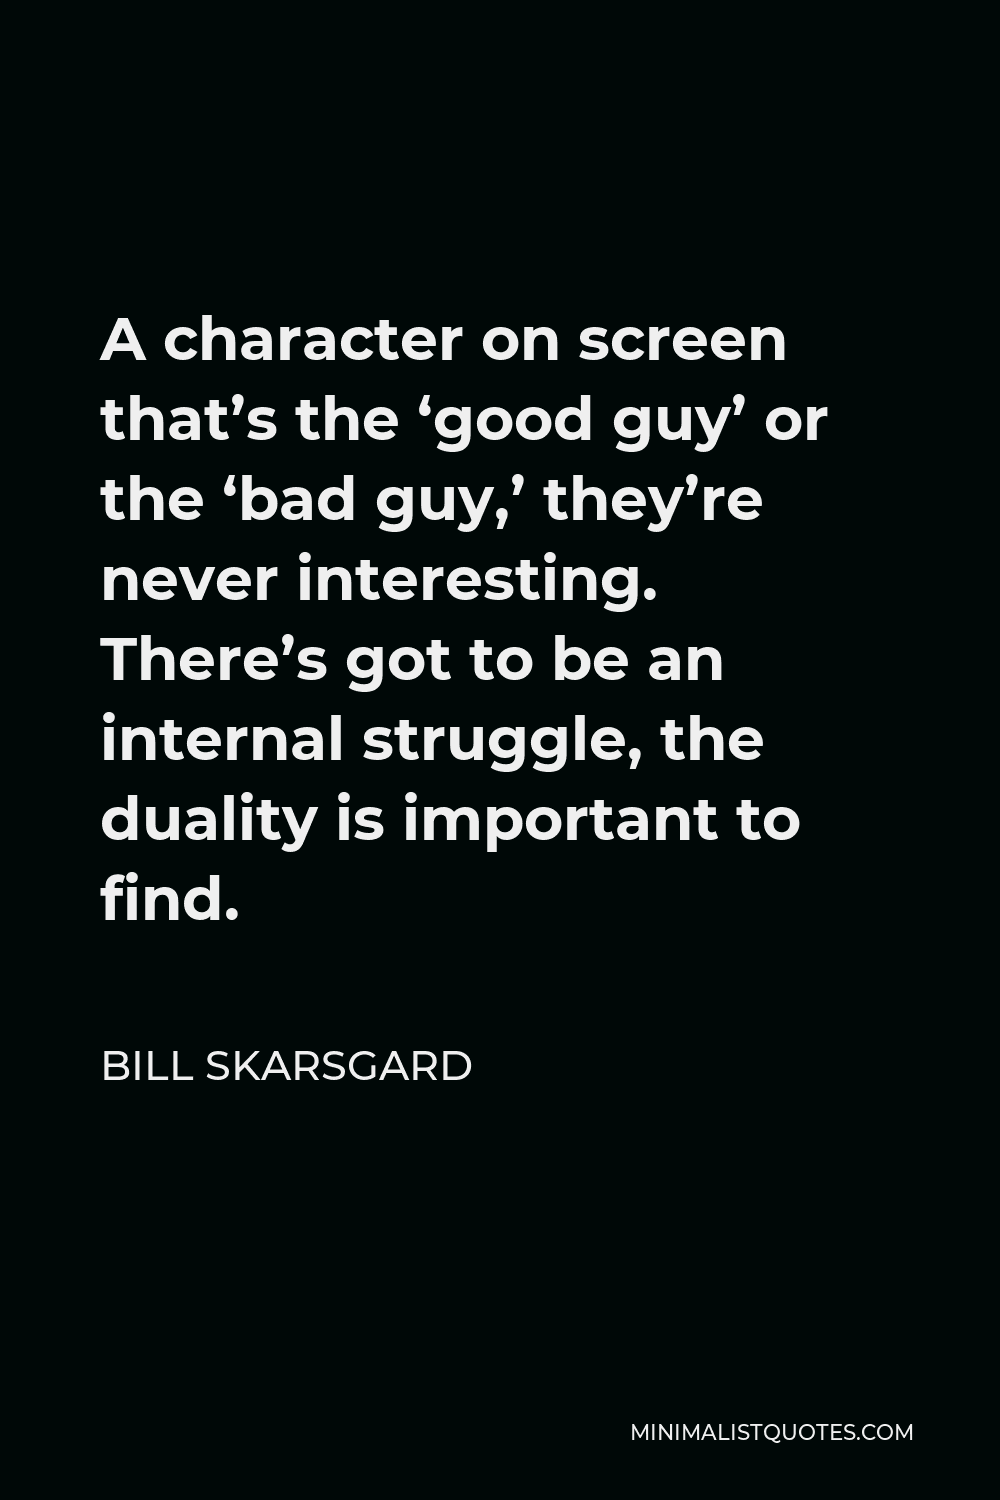 Bill Skarsgard Quote - A character on screen that’s the ‘good guy’ or the ‘bad guy,’ they’re never interesting. There’s got to be an internal struggle, the duality is important to find.